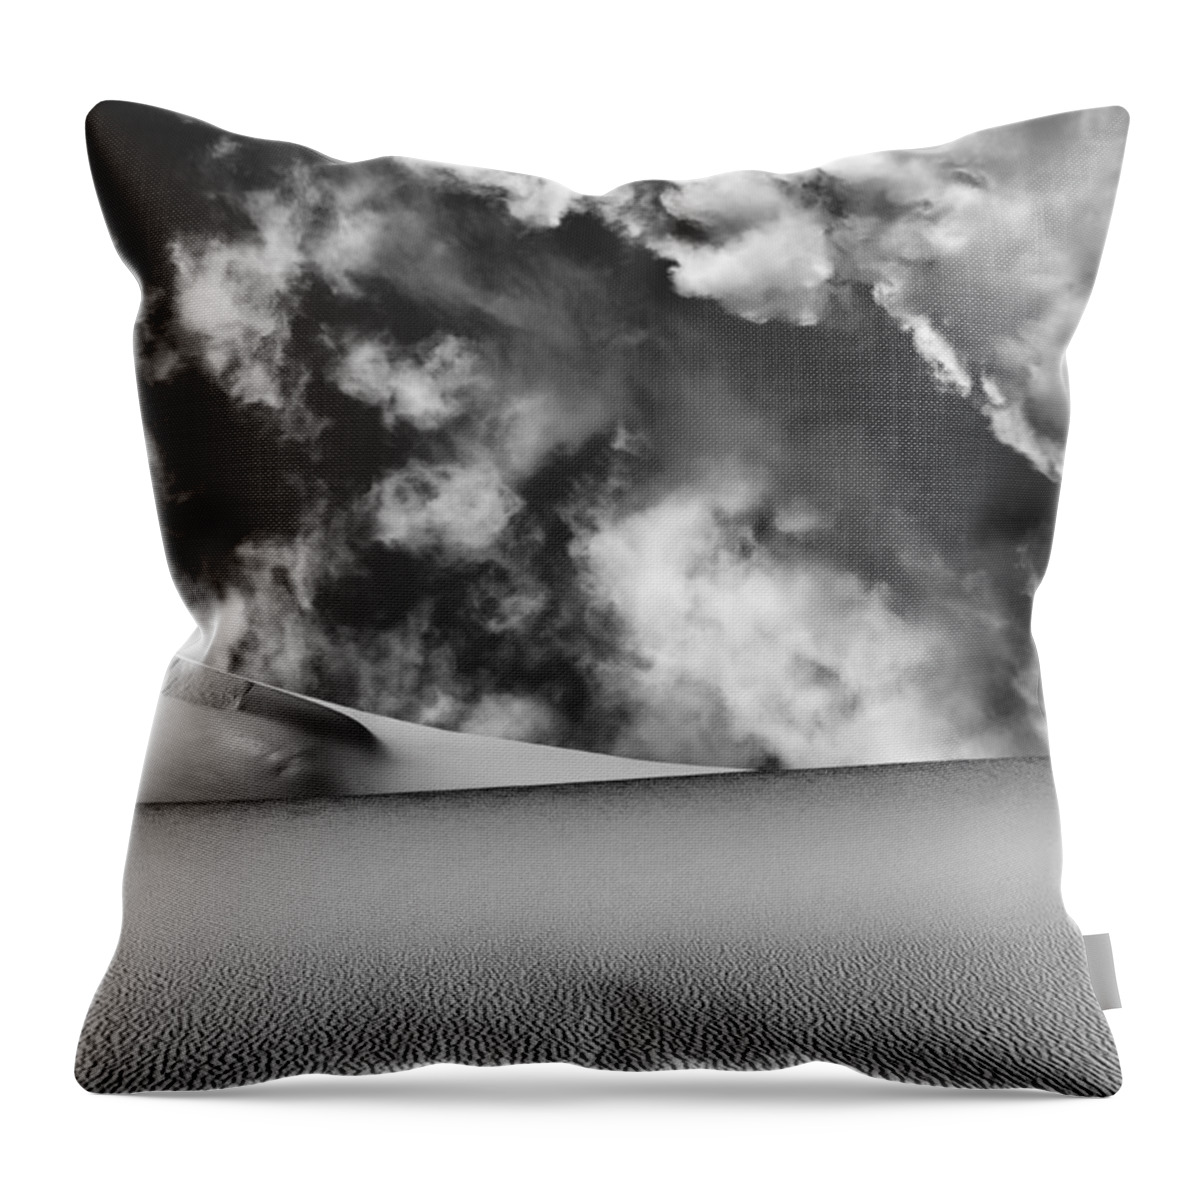 Desert Throw Pillow featuring the photograph Entropy by Dominic Piperata